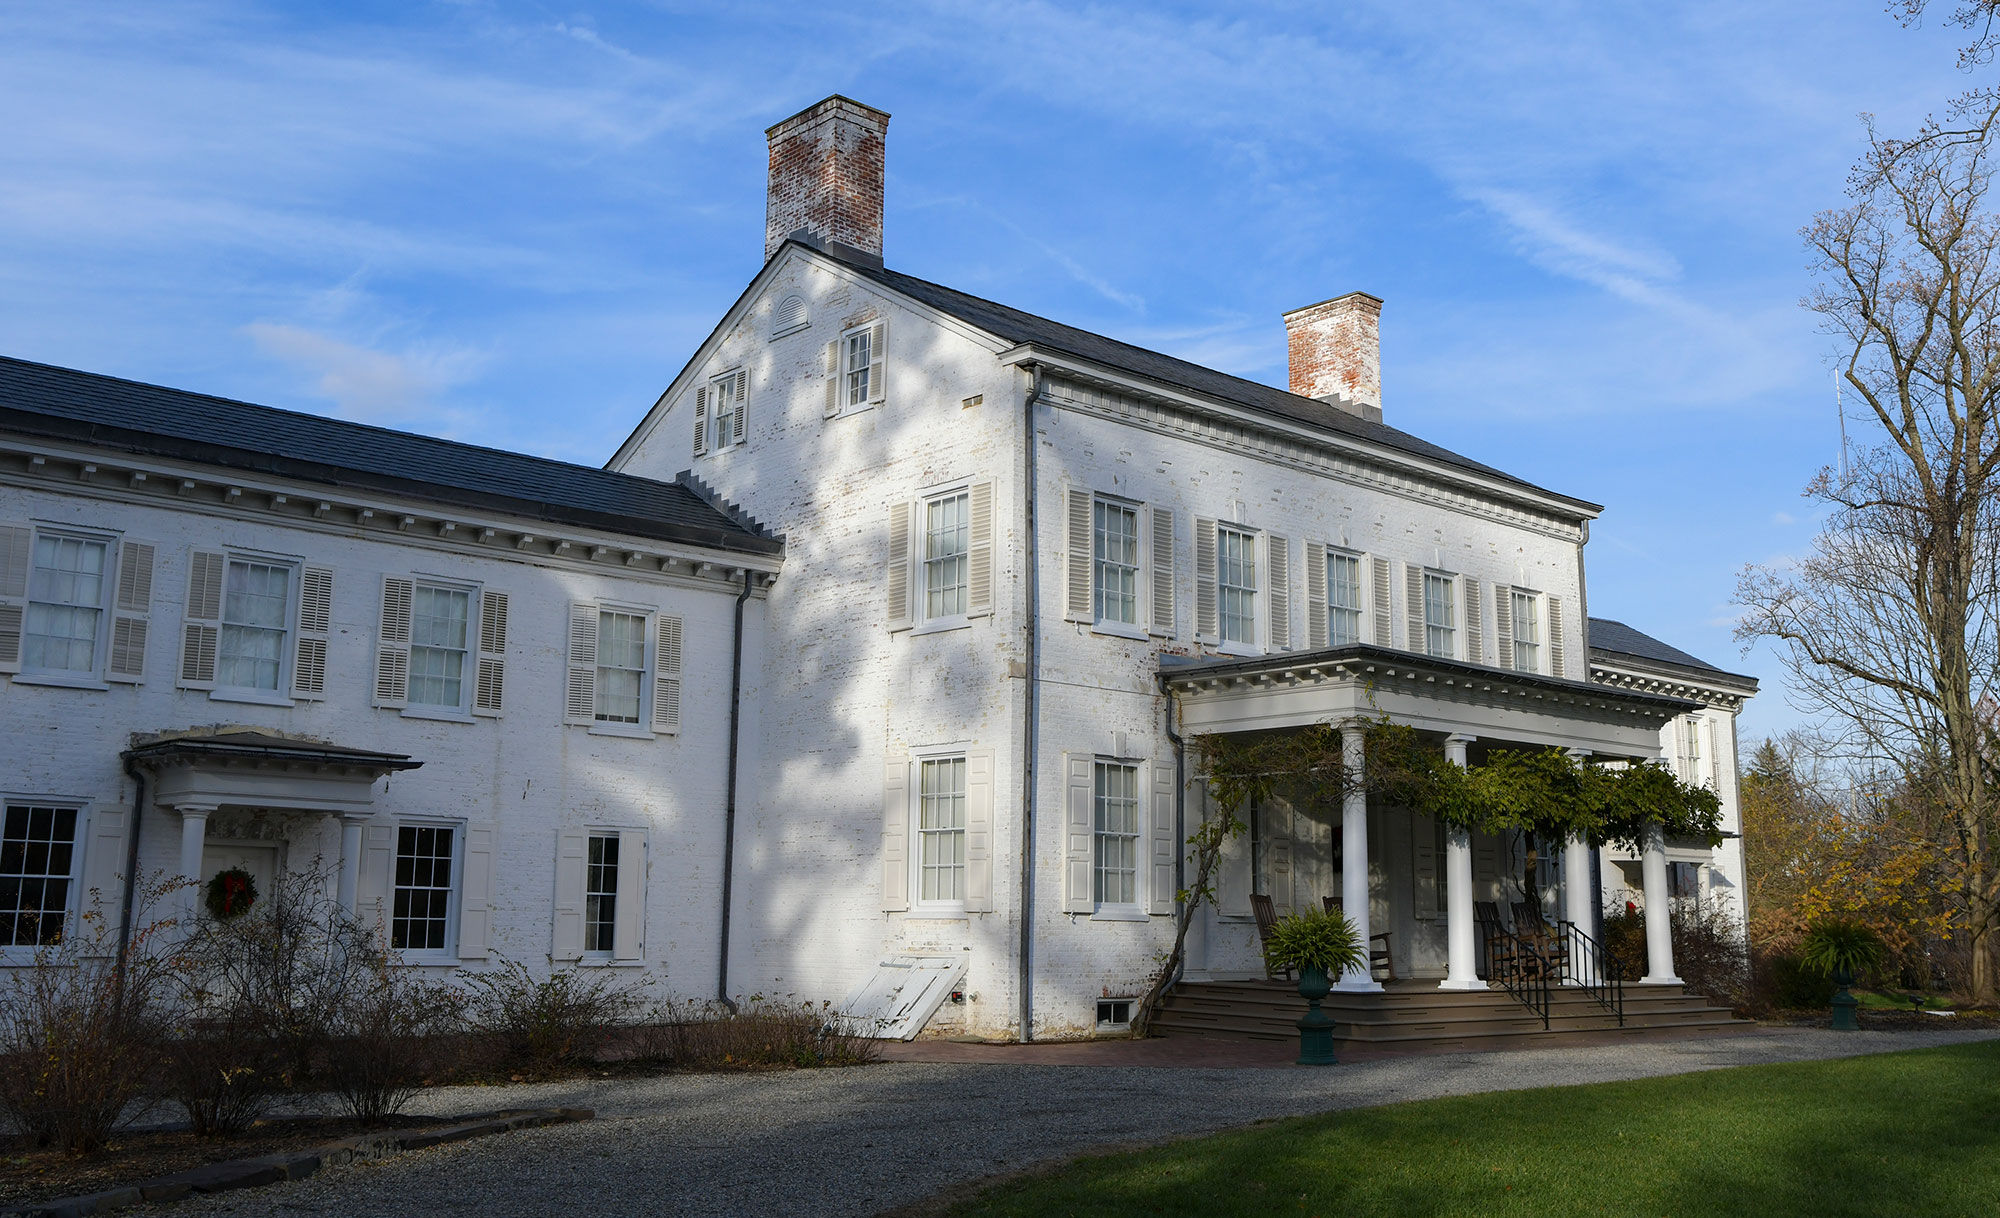 Bright blue sky and exterior photo of Morven, New Jerseys first Governors residence. White painted brick mansion with front portico, greenery wraps four columns.